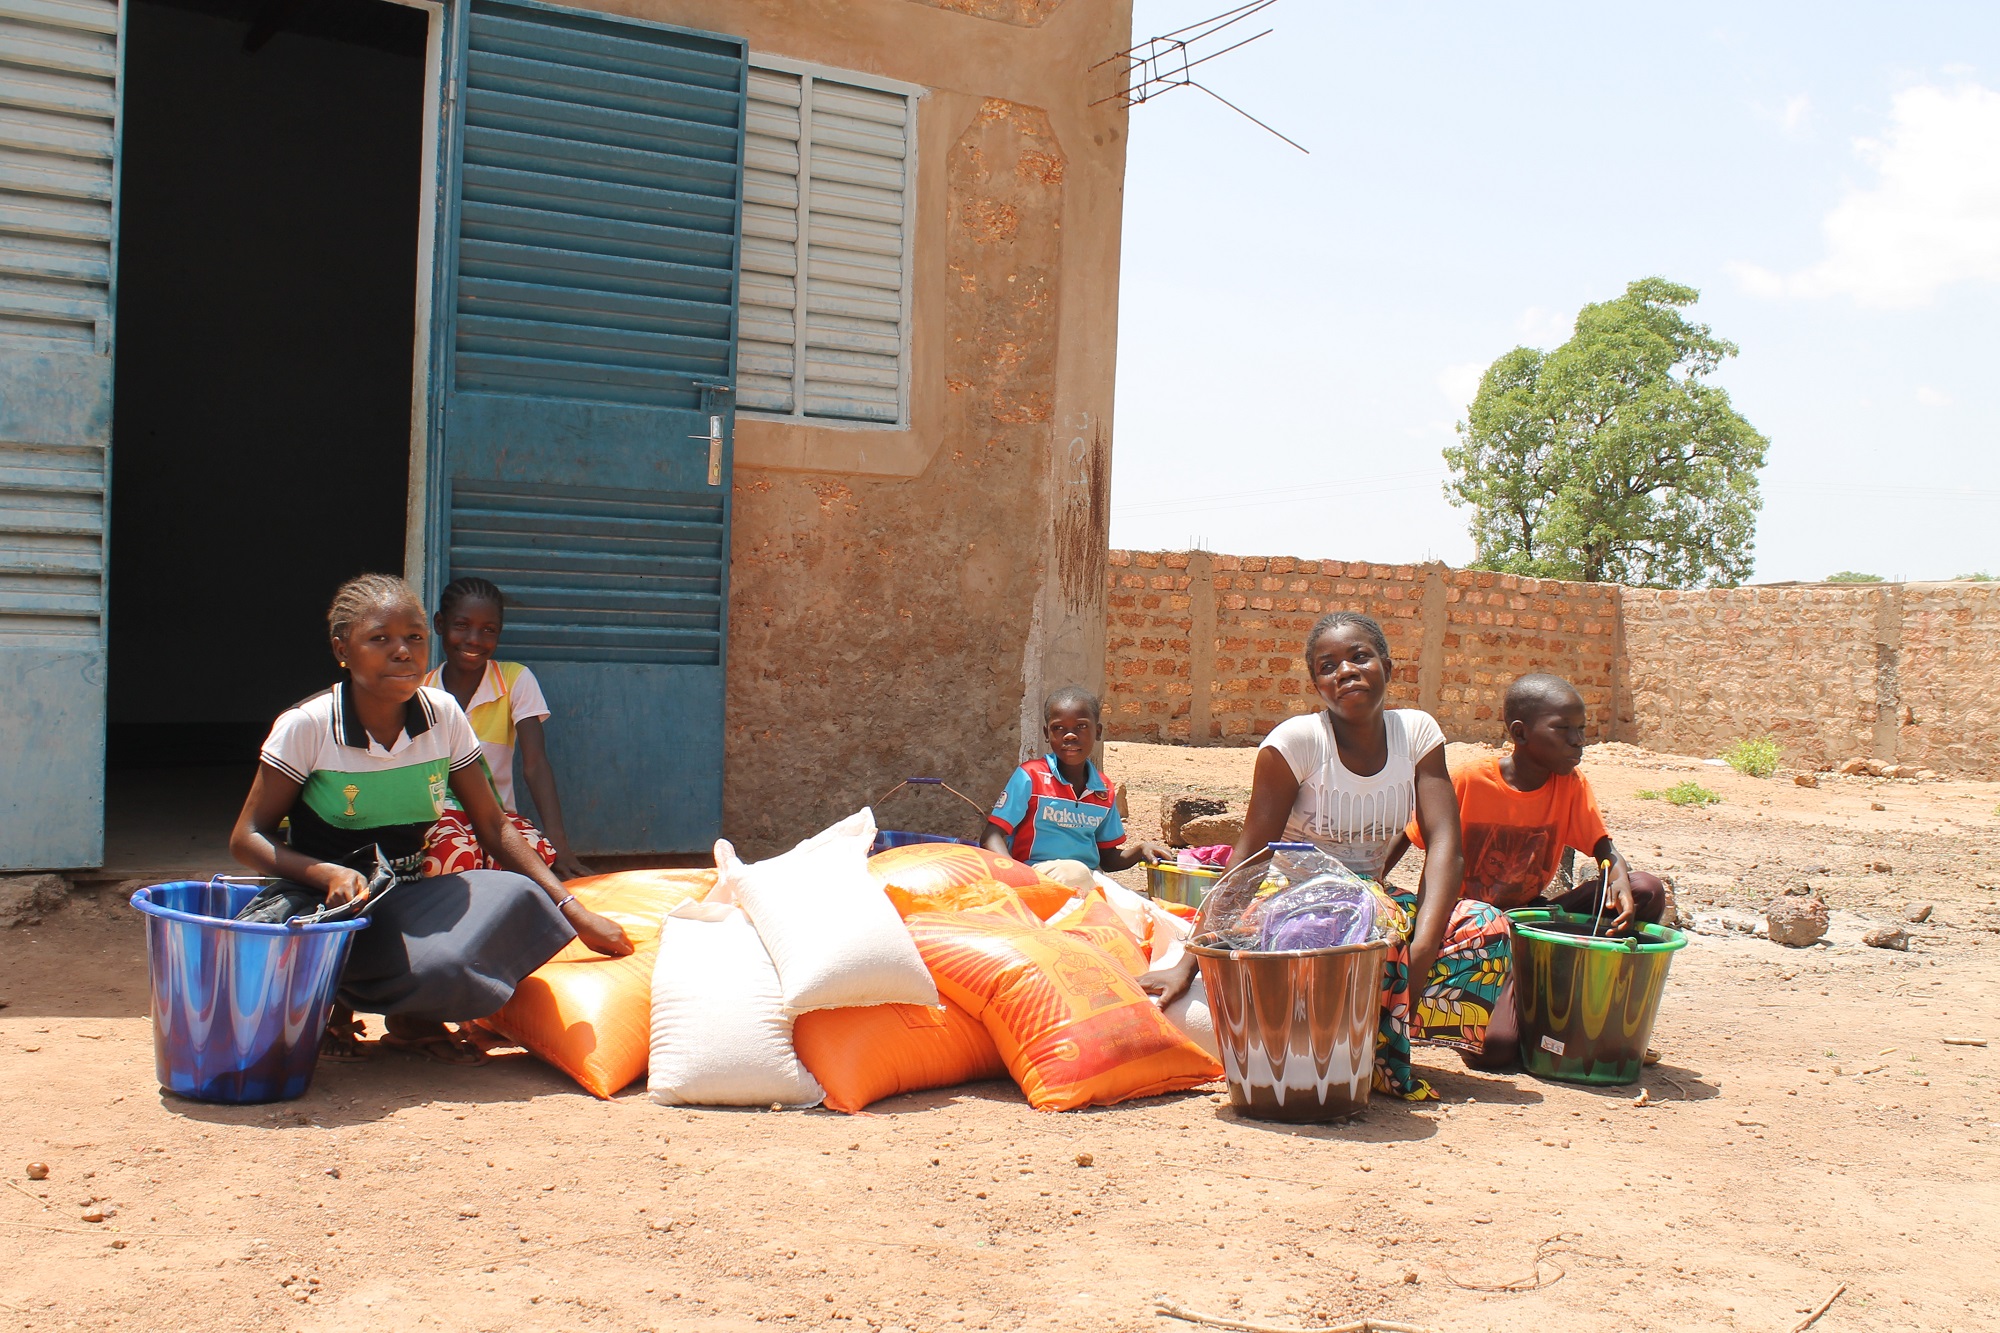 internally displaced women and children receive essential food items like rice and beans in Nouna, Burkina Faso